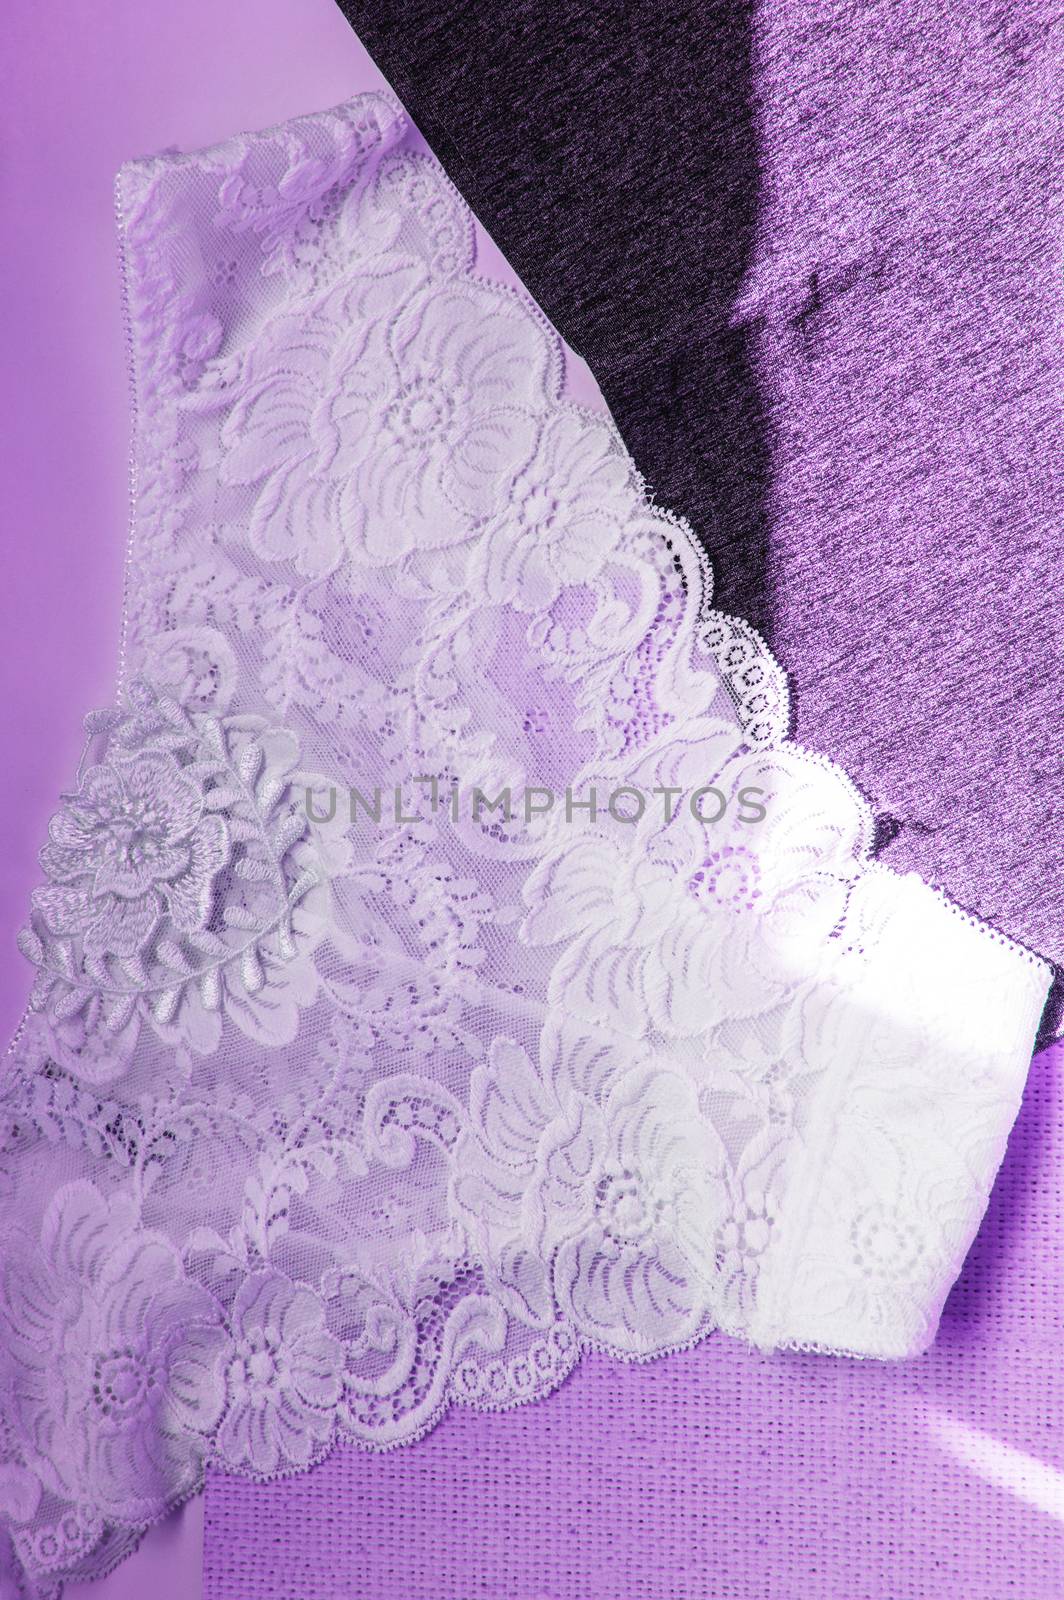 Lacy white sexy women's panties on purple neon background. Vertical shot, top view, flat lay by claire_lucia